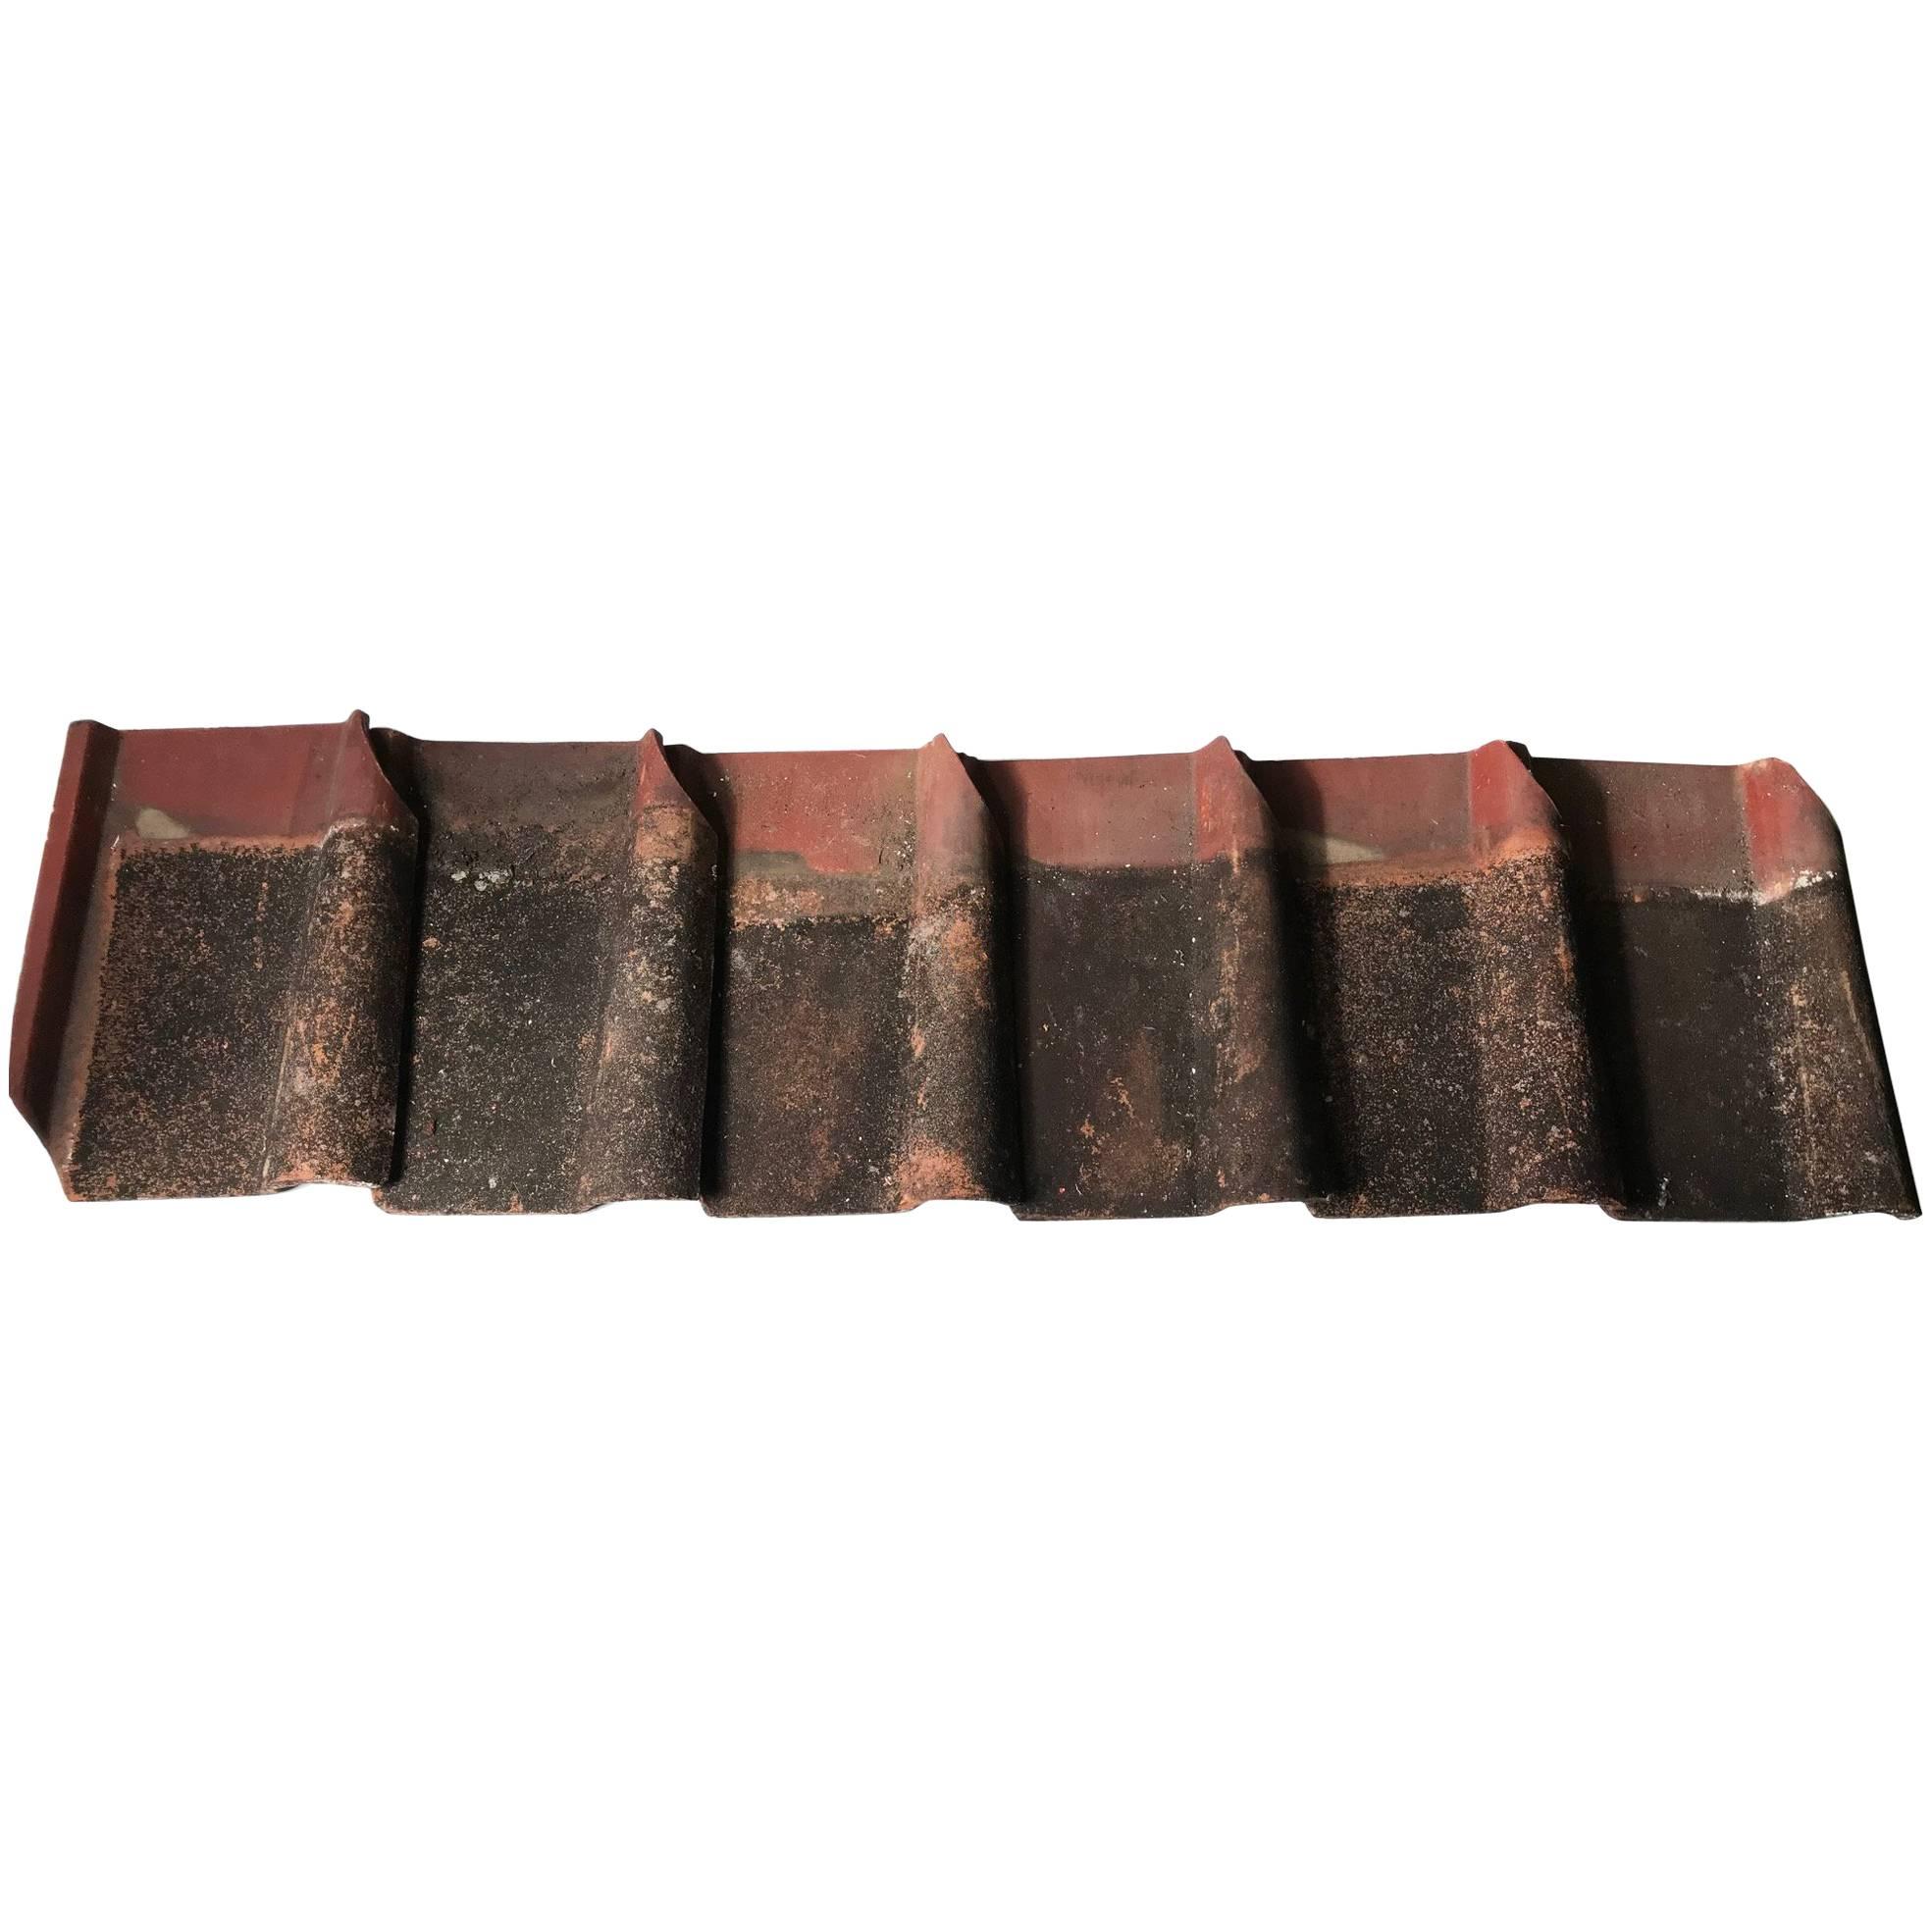 Let your imagination soar

A hard to find group of six (6) large-scale antique temple garden tiles - hand made in thick heavy terracotta and may be re-purposed for garden edging or in any number of exterior or interior decorative project